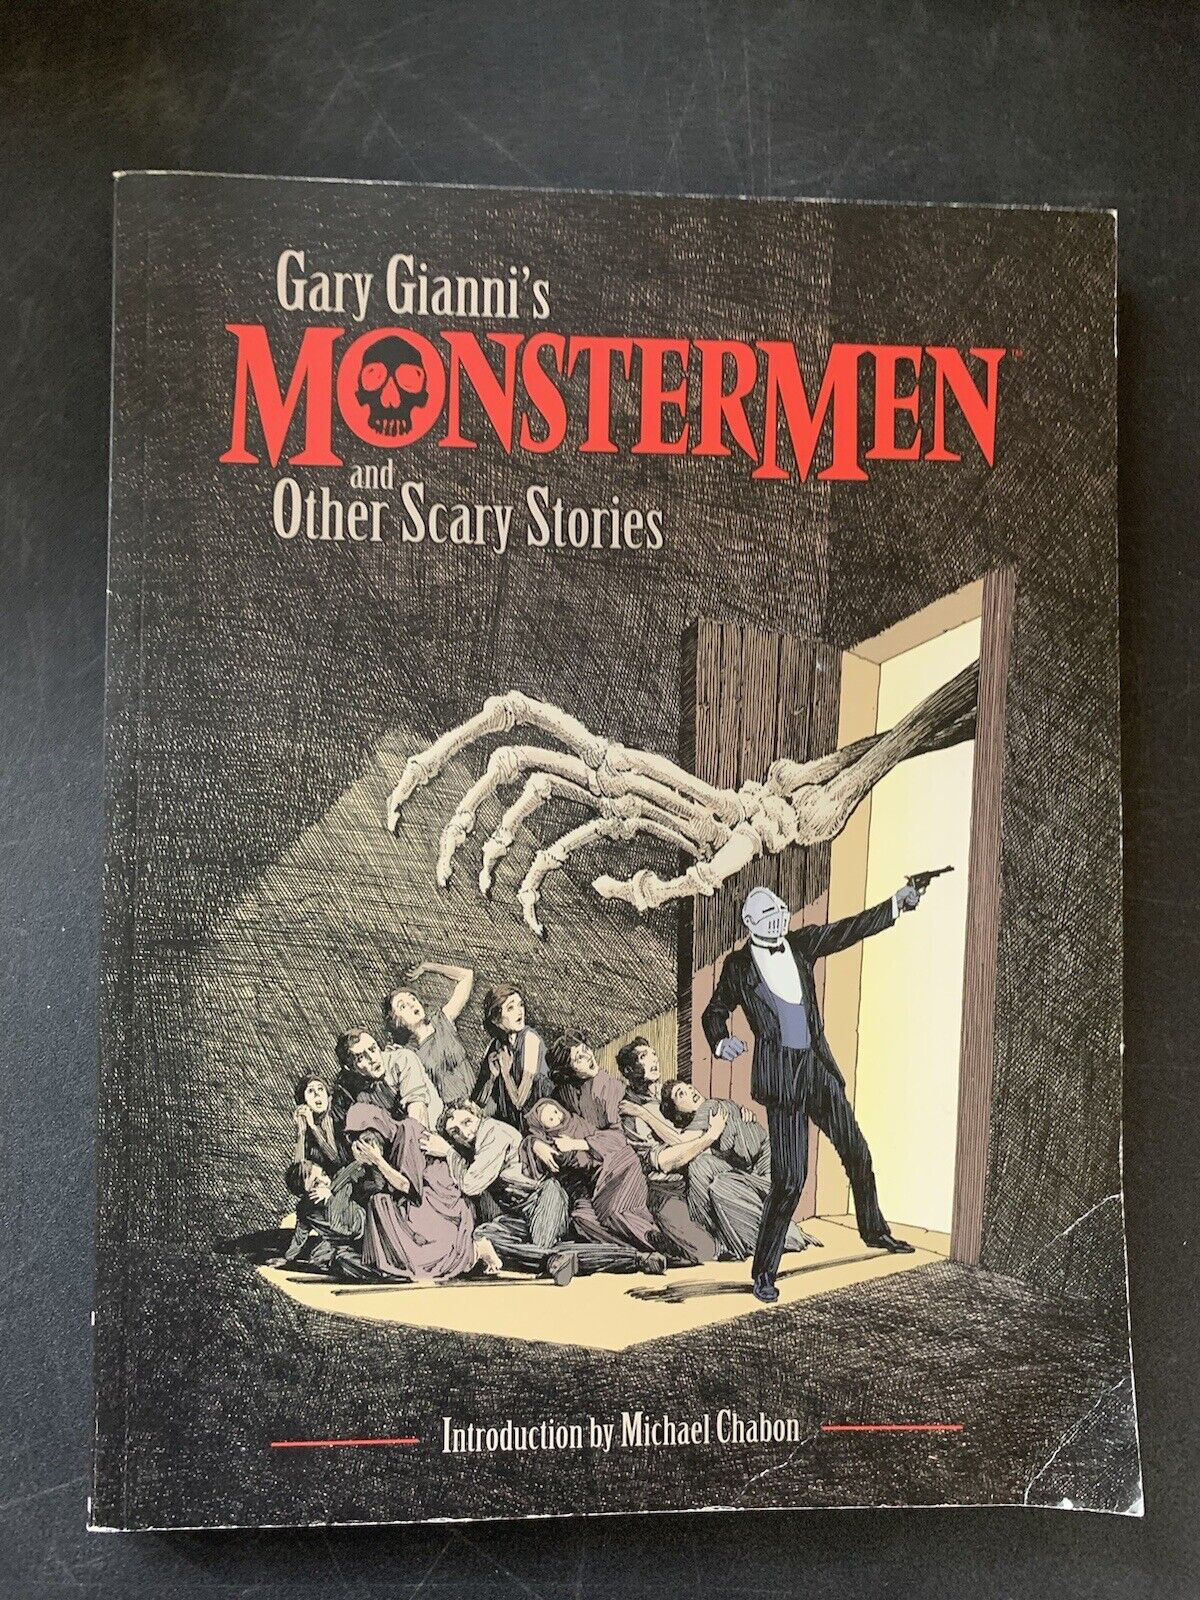 Gary Gianni Gary Gianni's Monstermen And Other Scary Stories (Paperback) Good